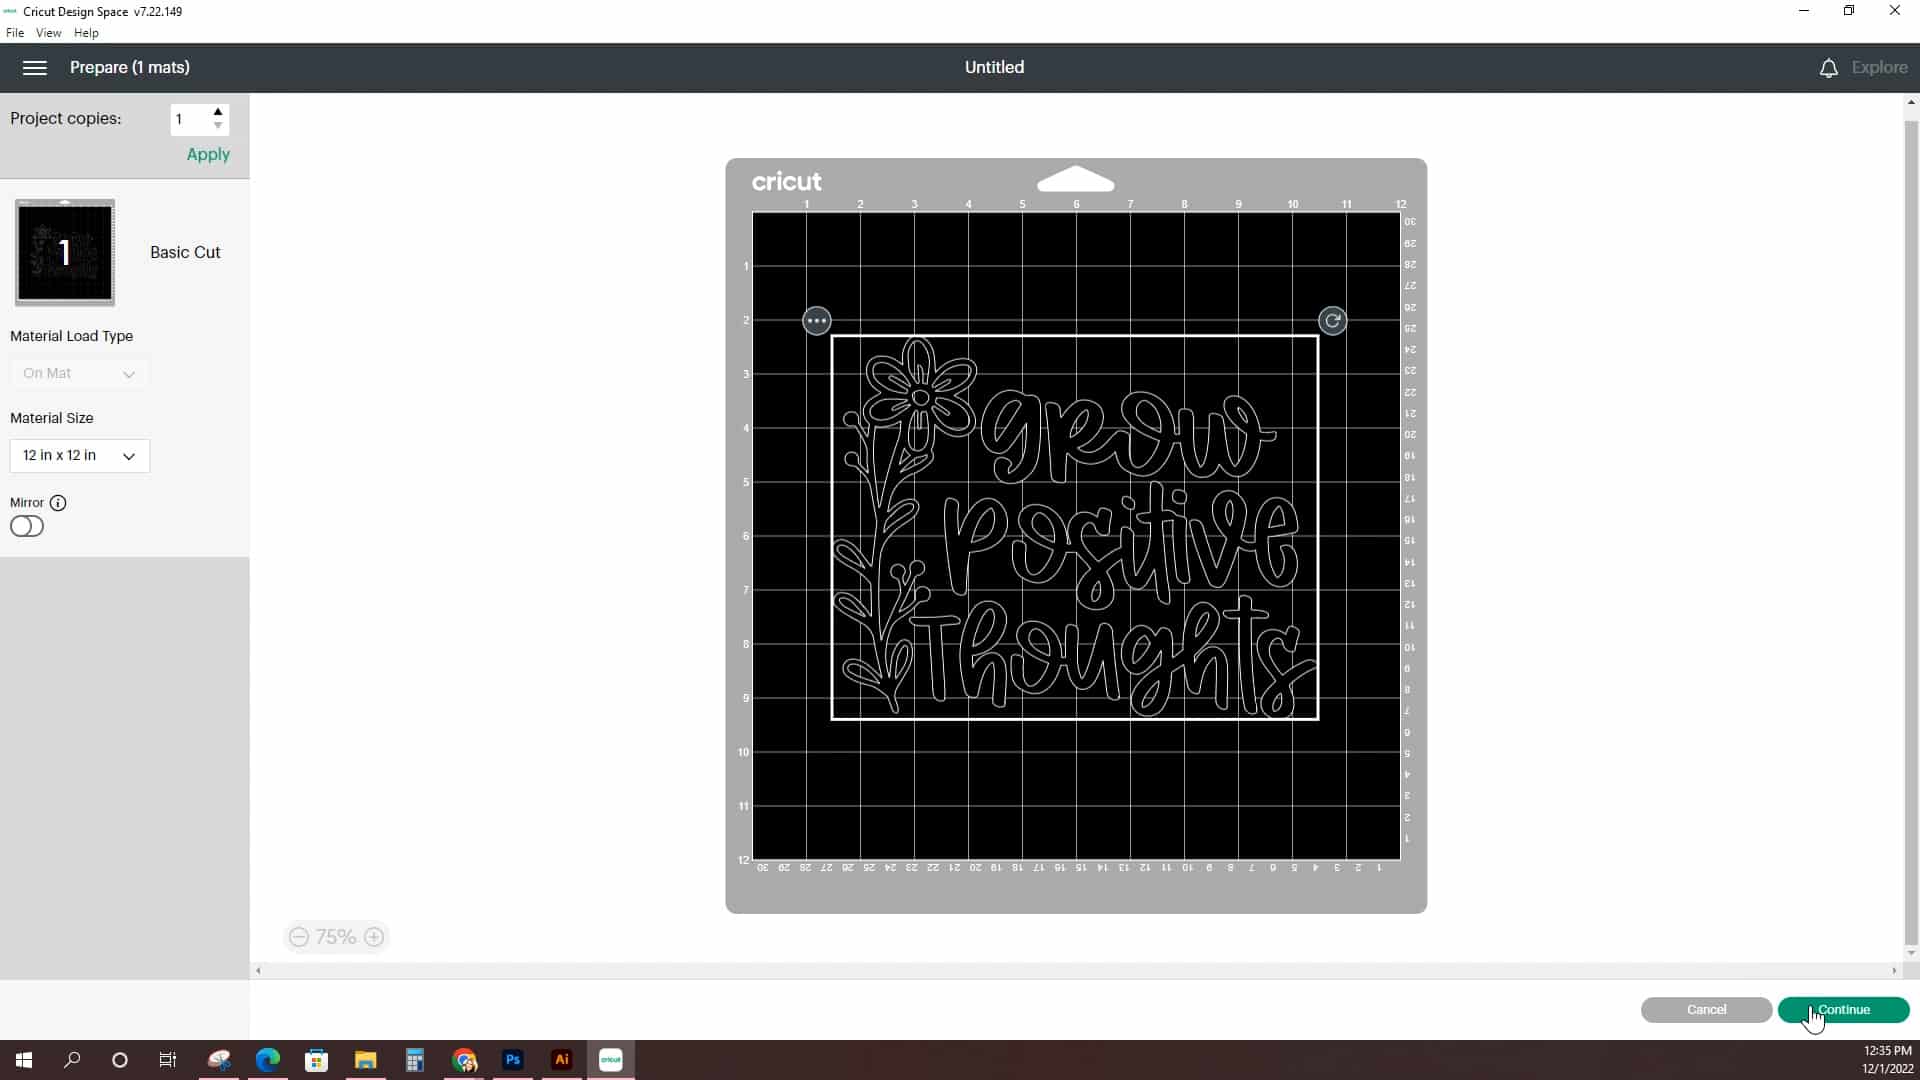 Screenshot of Cricut Design Space software with "Grow Positive Thoughts" SVG uploaded to the canvas and ready to cut